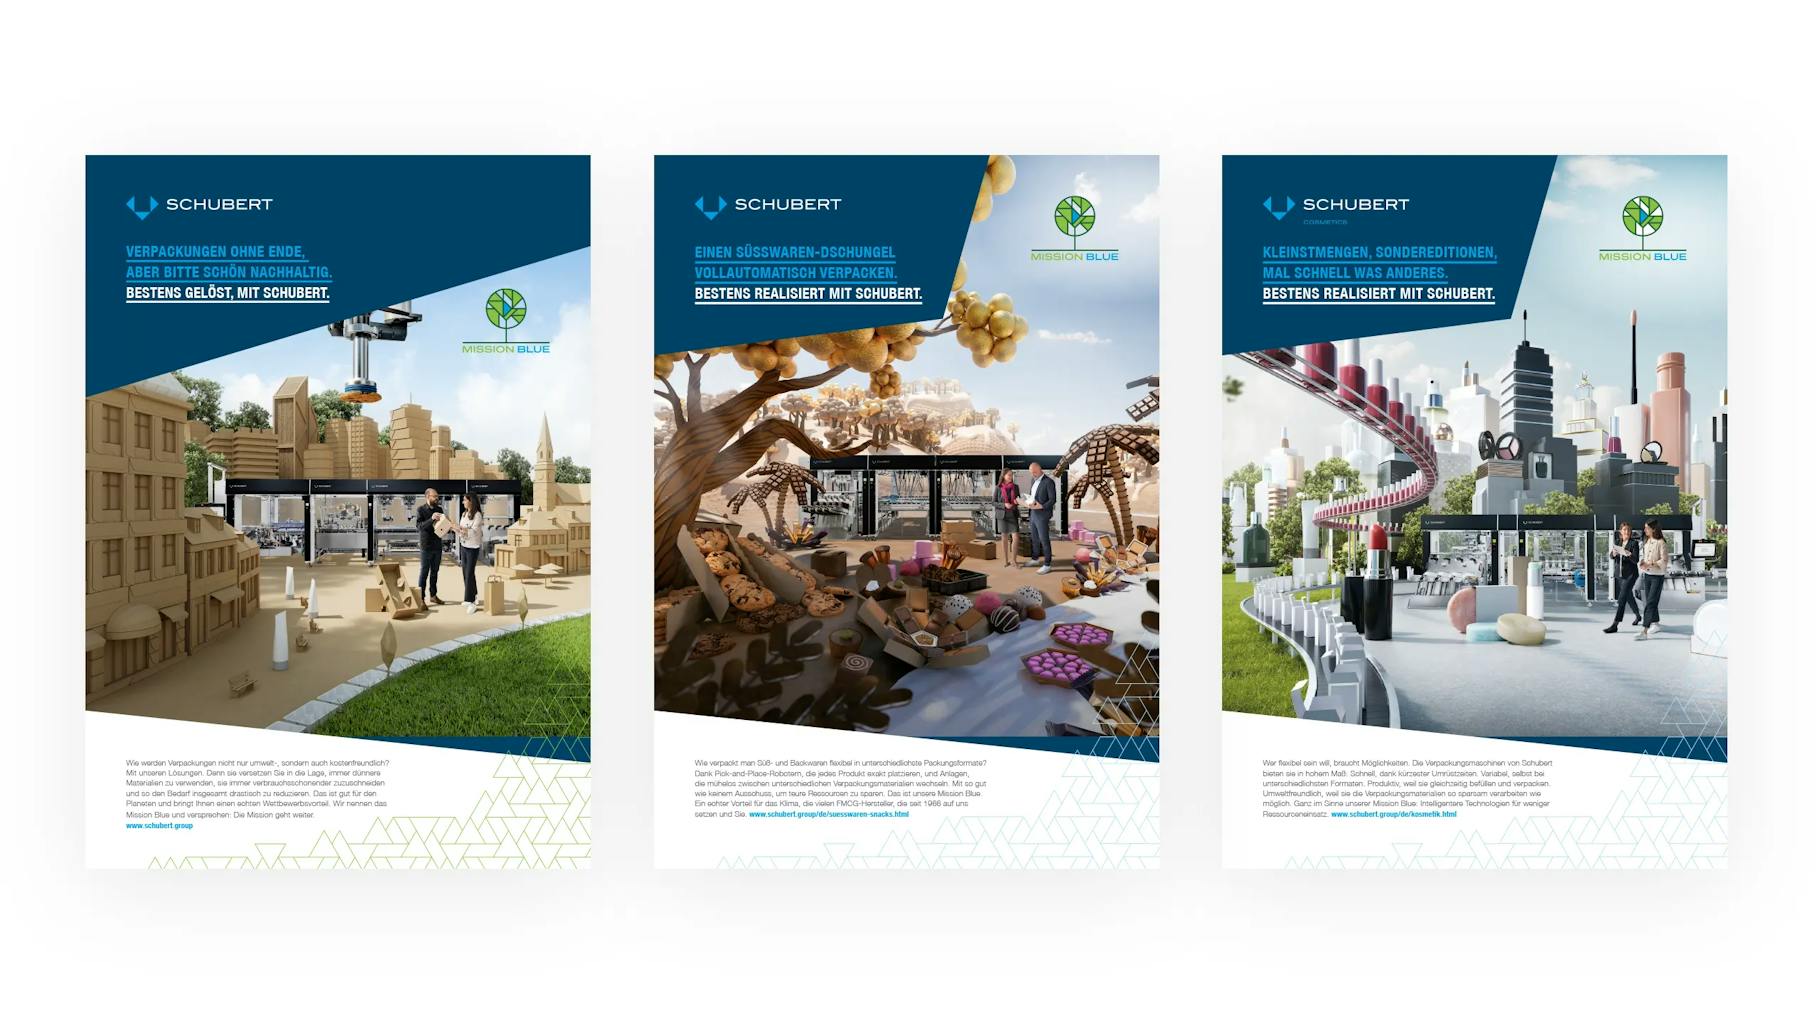 Three advertising banners created by the B2B advertising agency Ruess Group